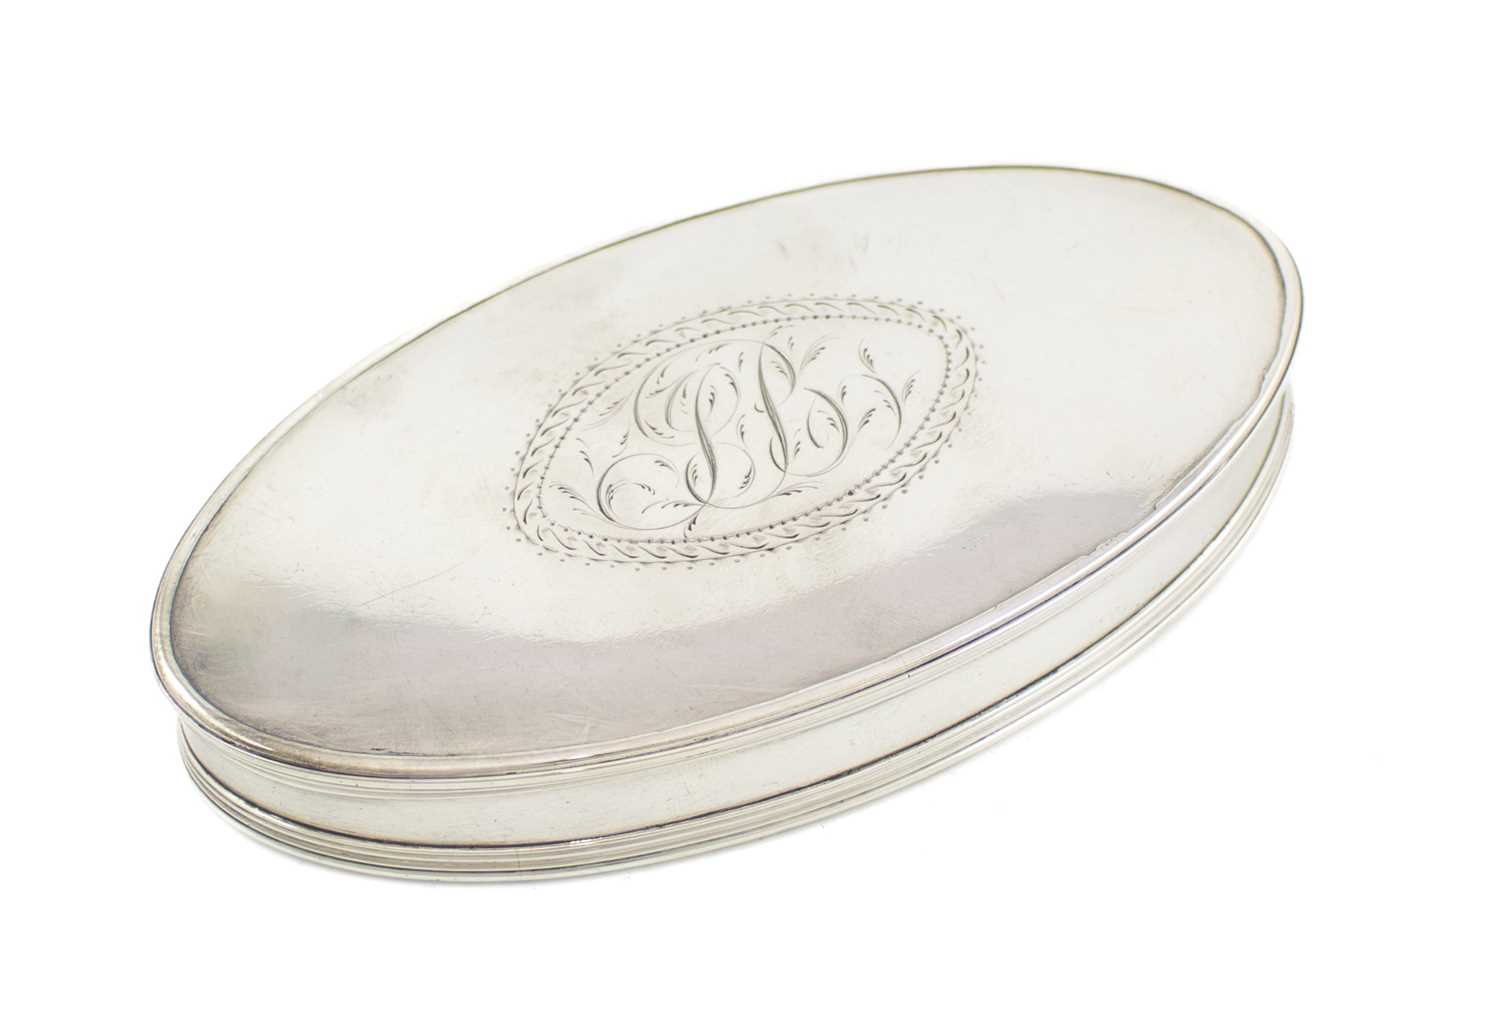 A George III silver snuff box, maker's mark worn, circa 1800, oval form, the pull-off cover with